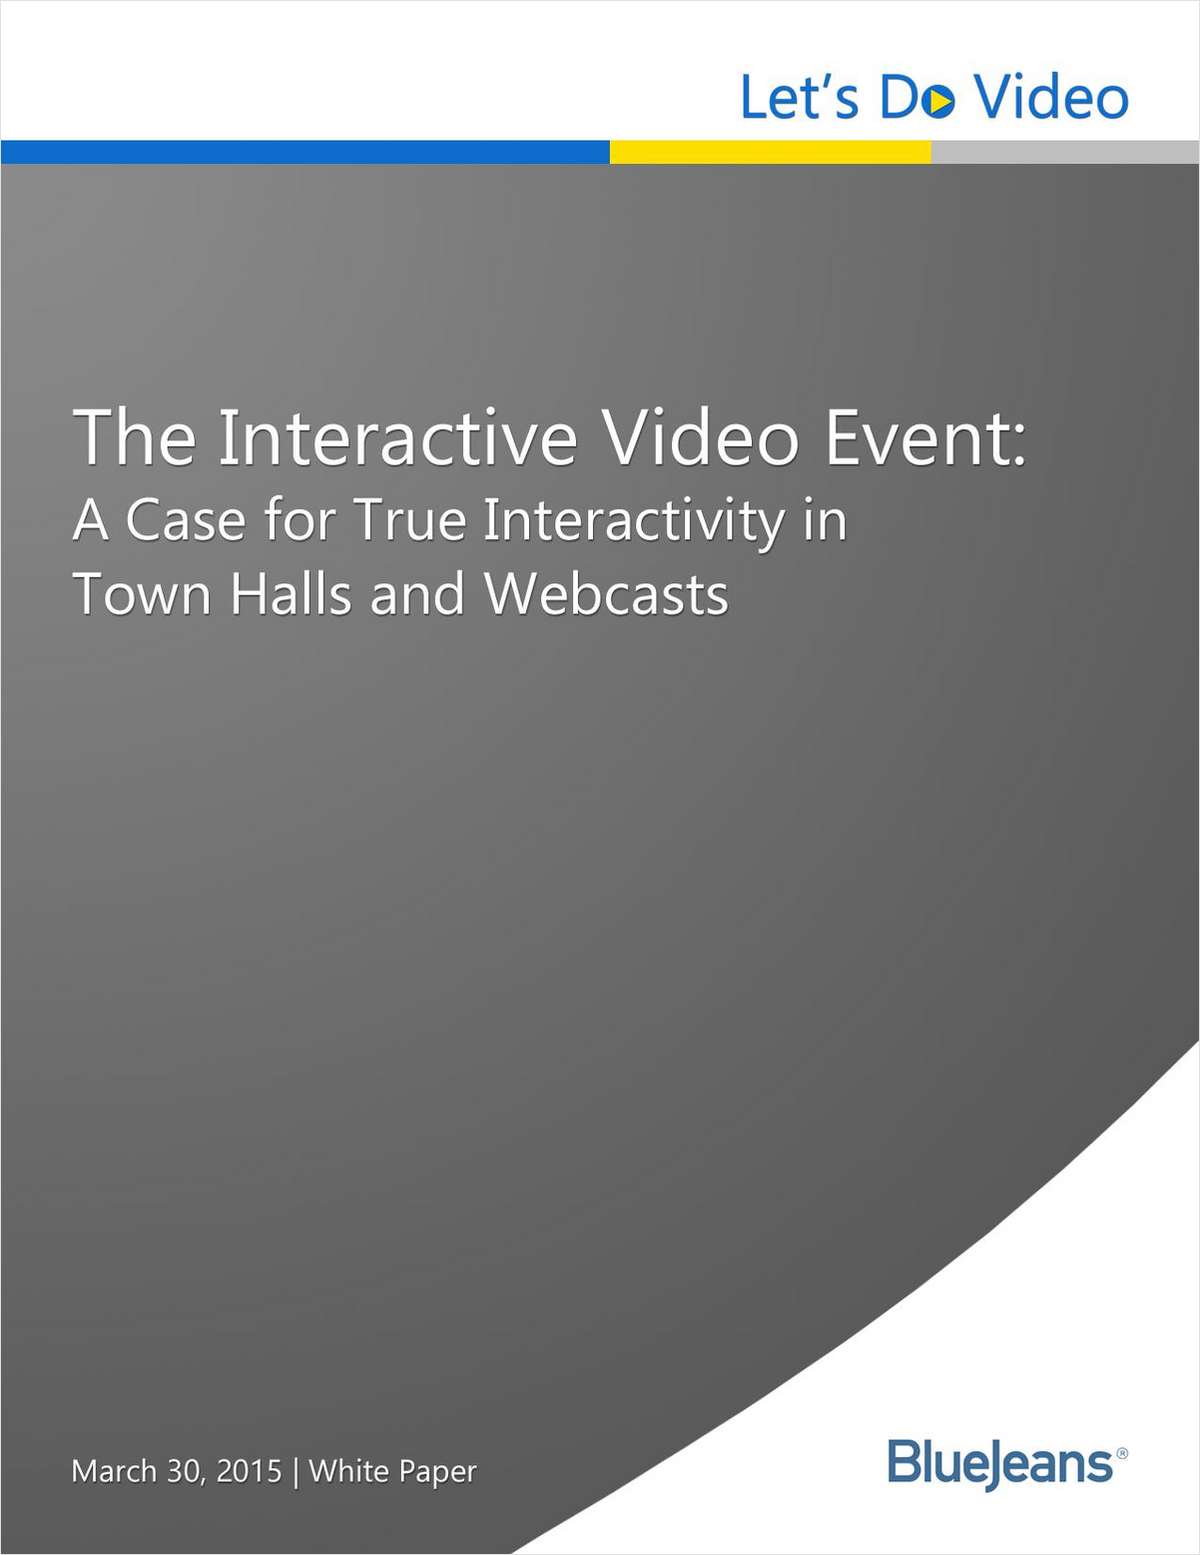 The Interactive Video Event: A Case for True Interactivity in Town Halls and Webcasts